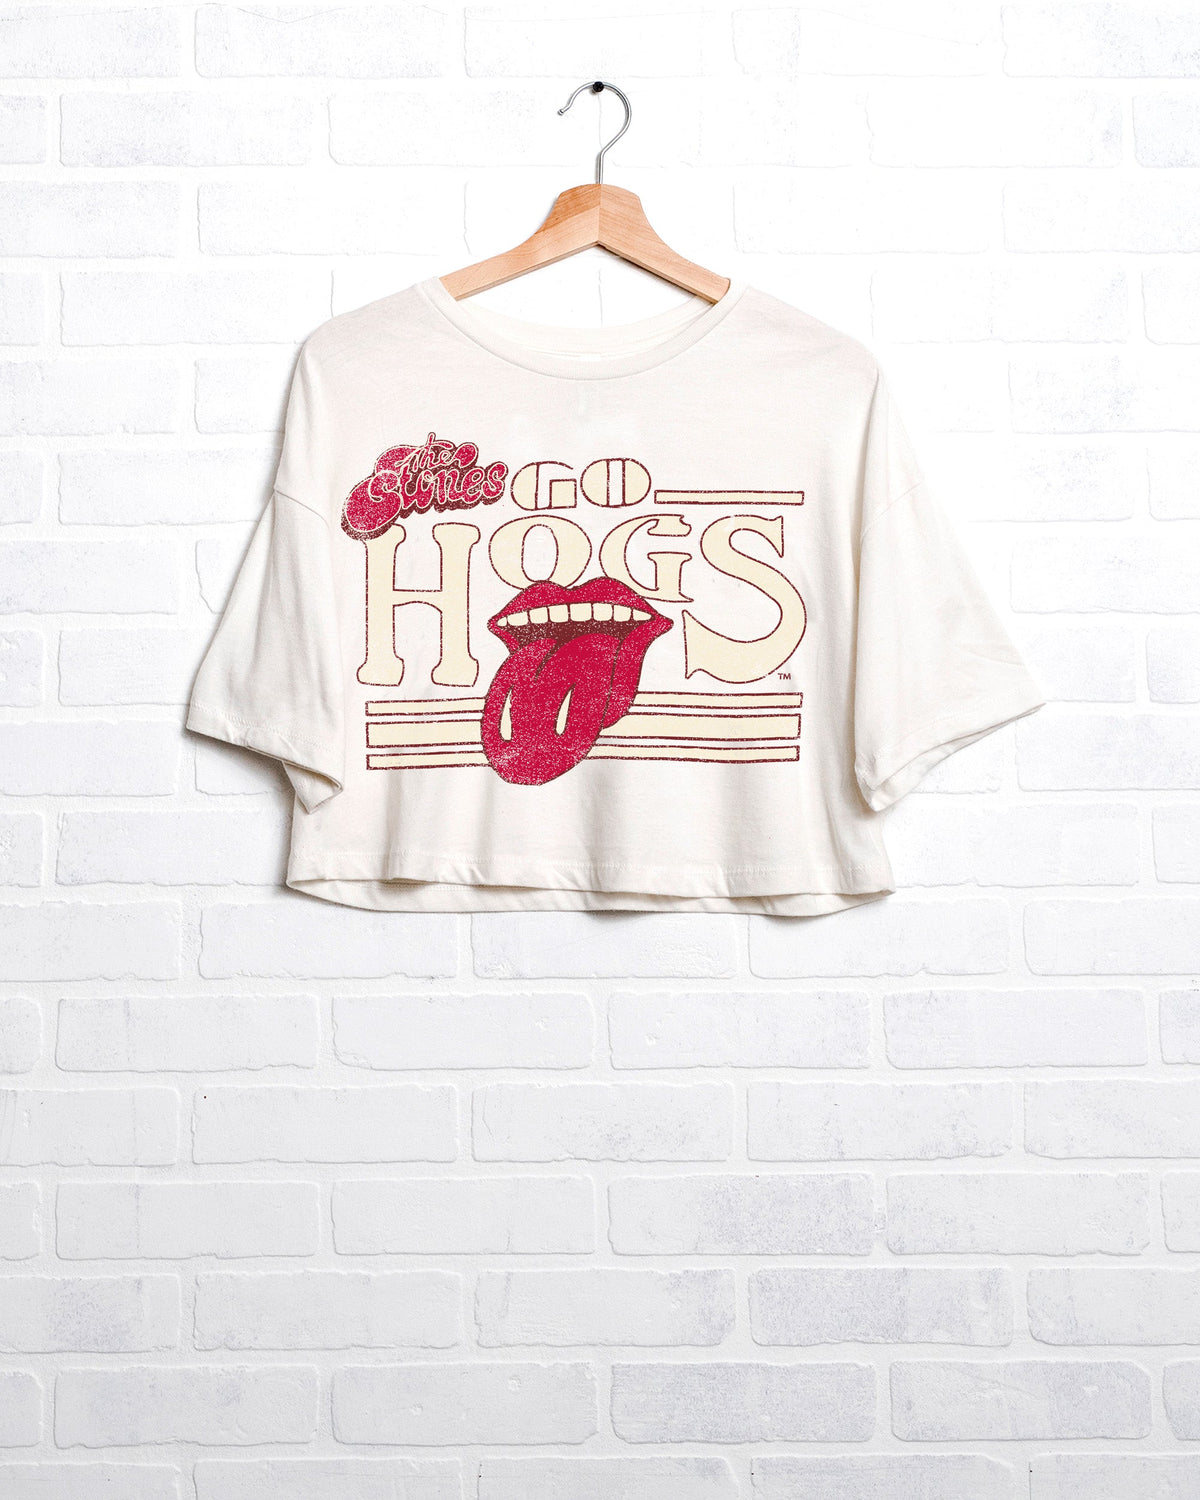 Rolling Stones Hogs Stoned White Cropped Tee - shoplivylu